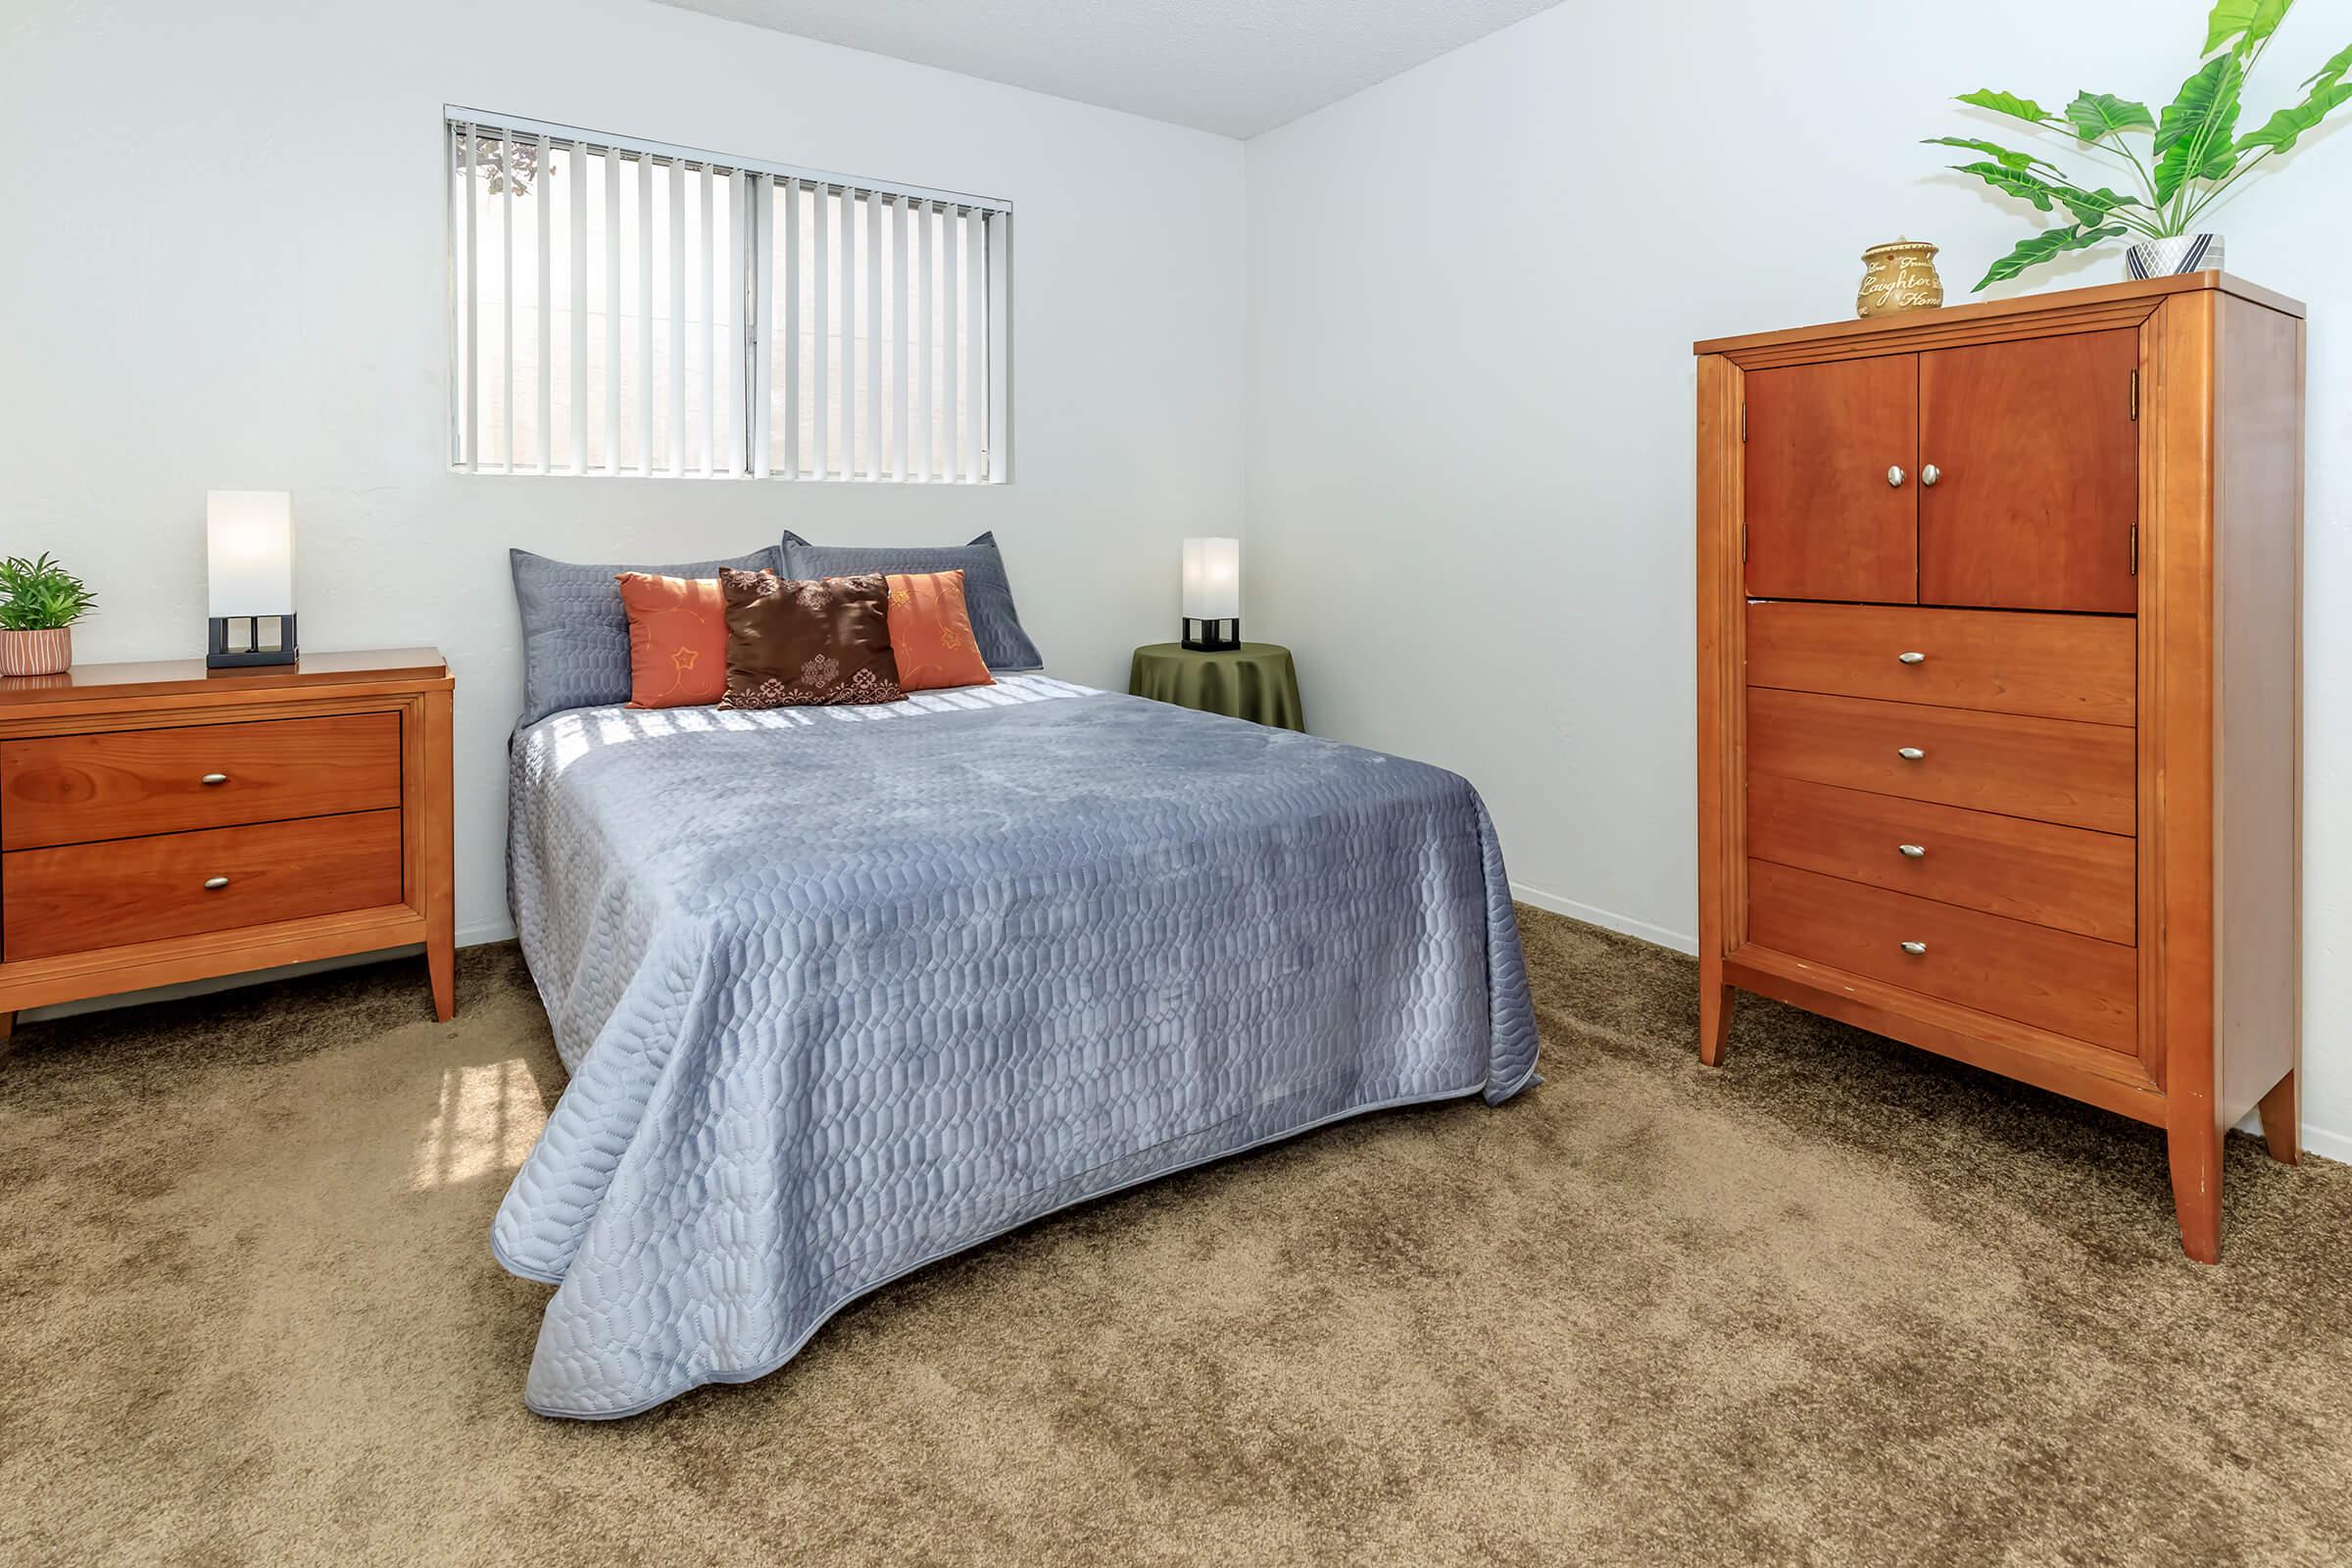 ALL FLOOR PLANS INCLUDE WALK-IN CLOSETS AND EXTRA STORAGE